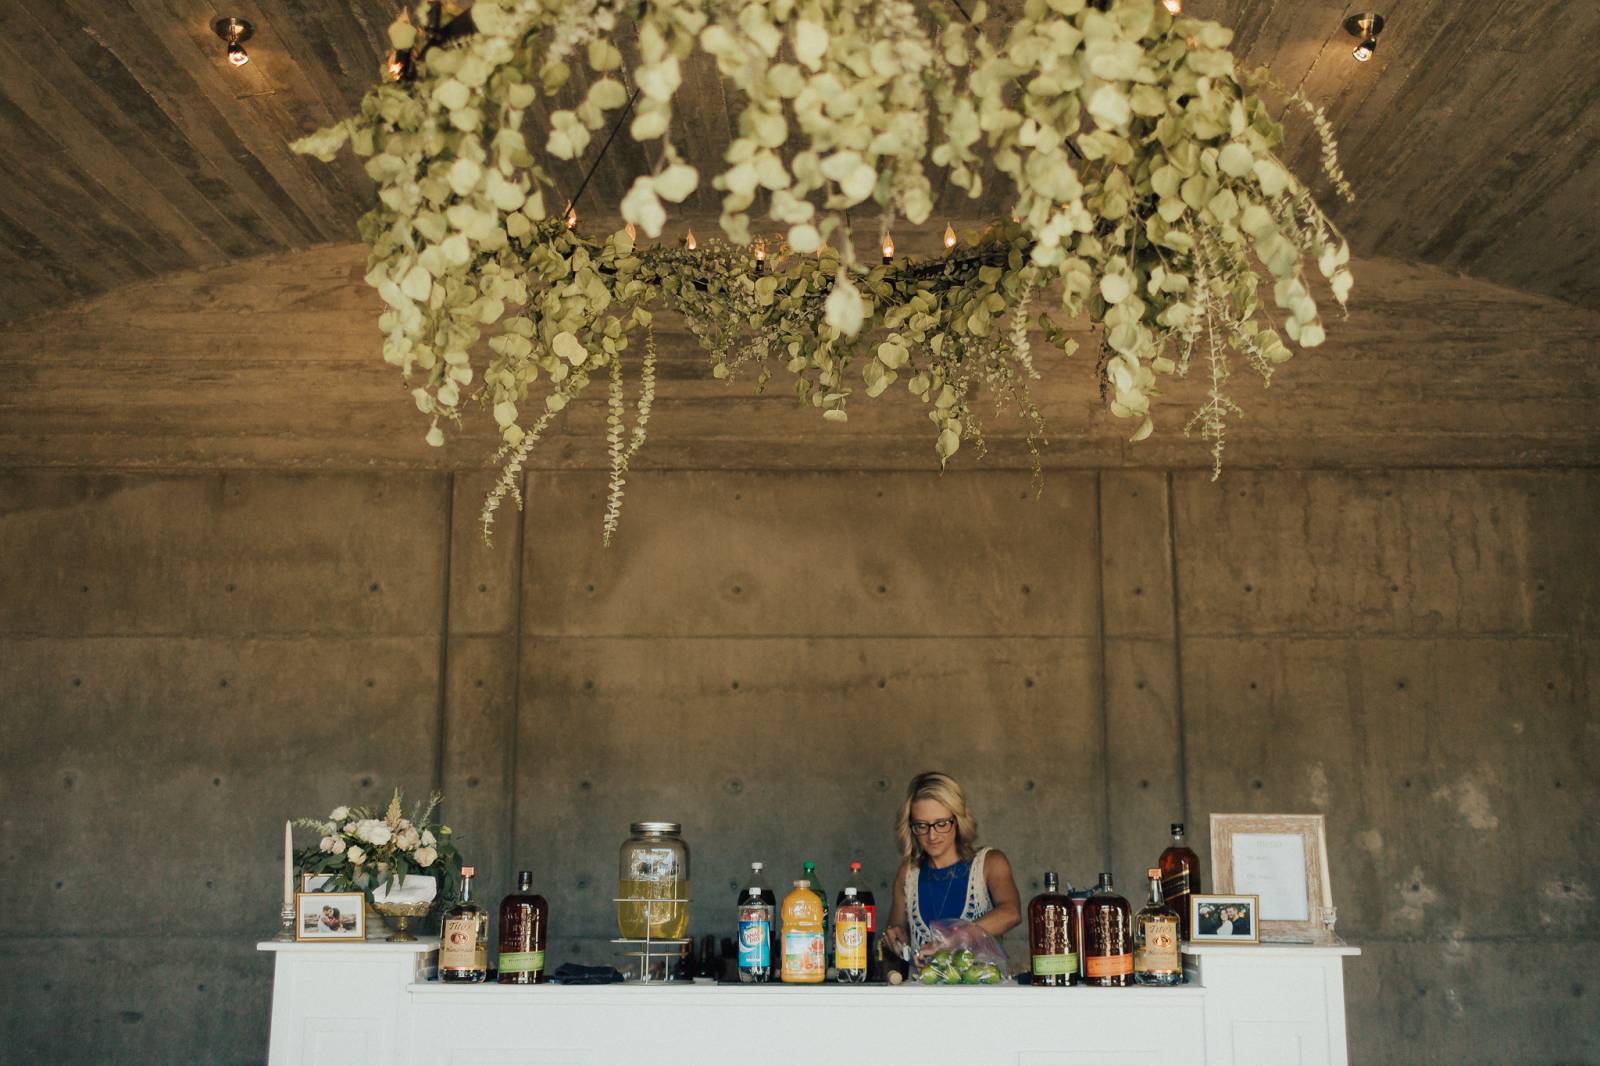 The Girl Preparing the Drinks For the Guests in the Wedding | The Wedding Standard